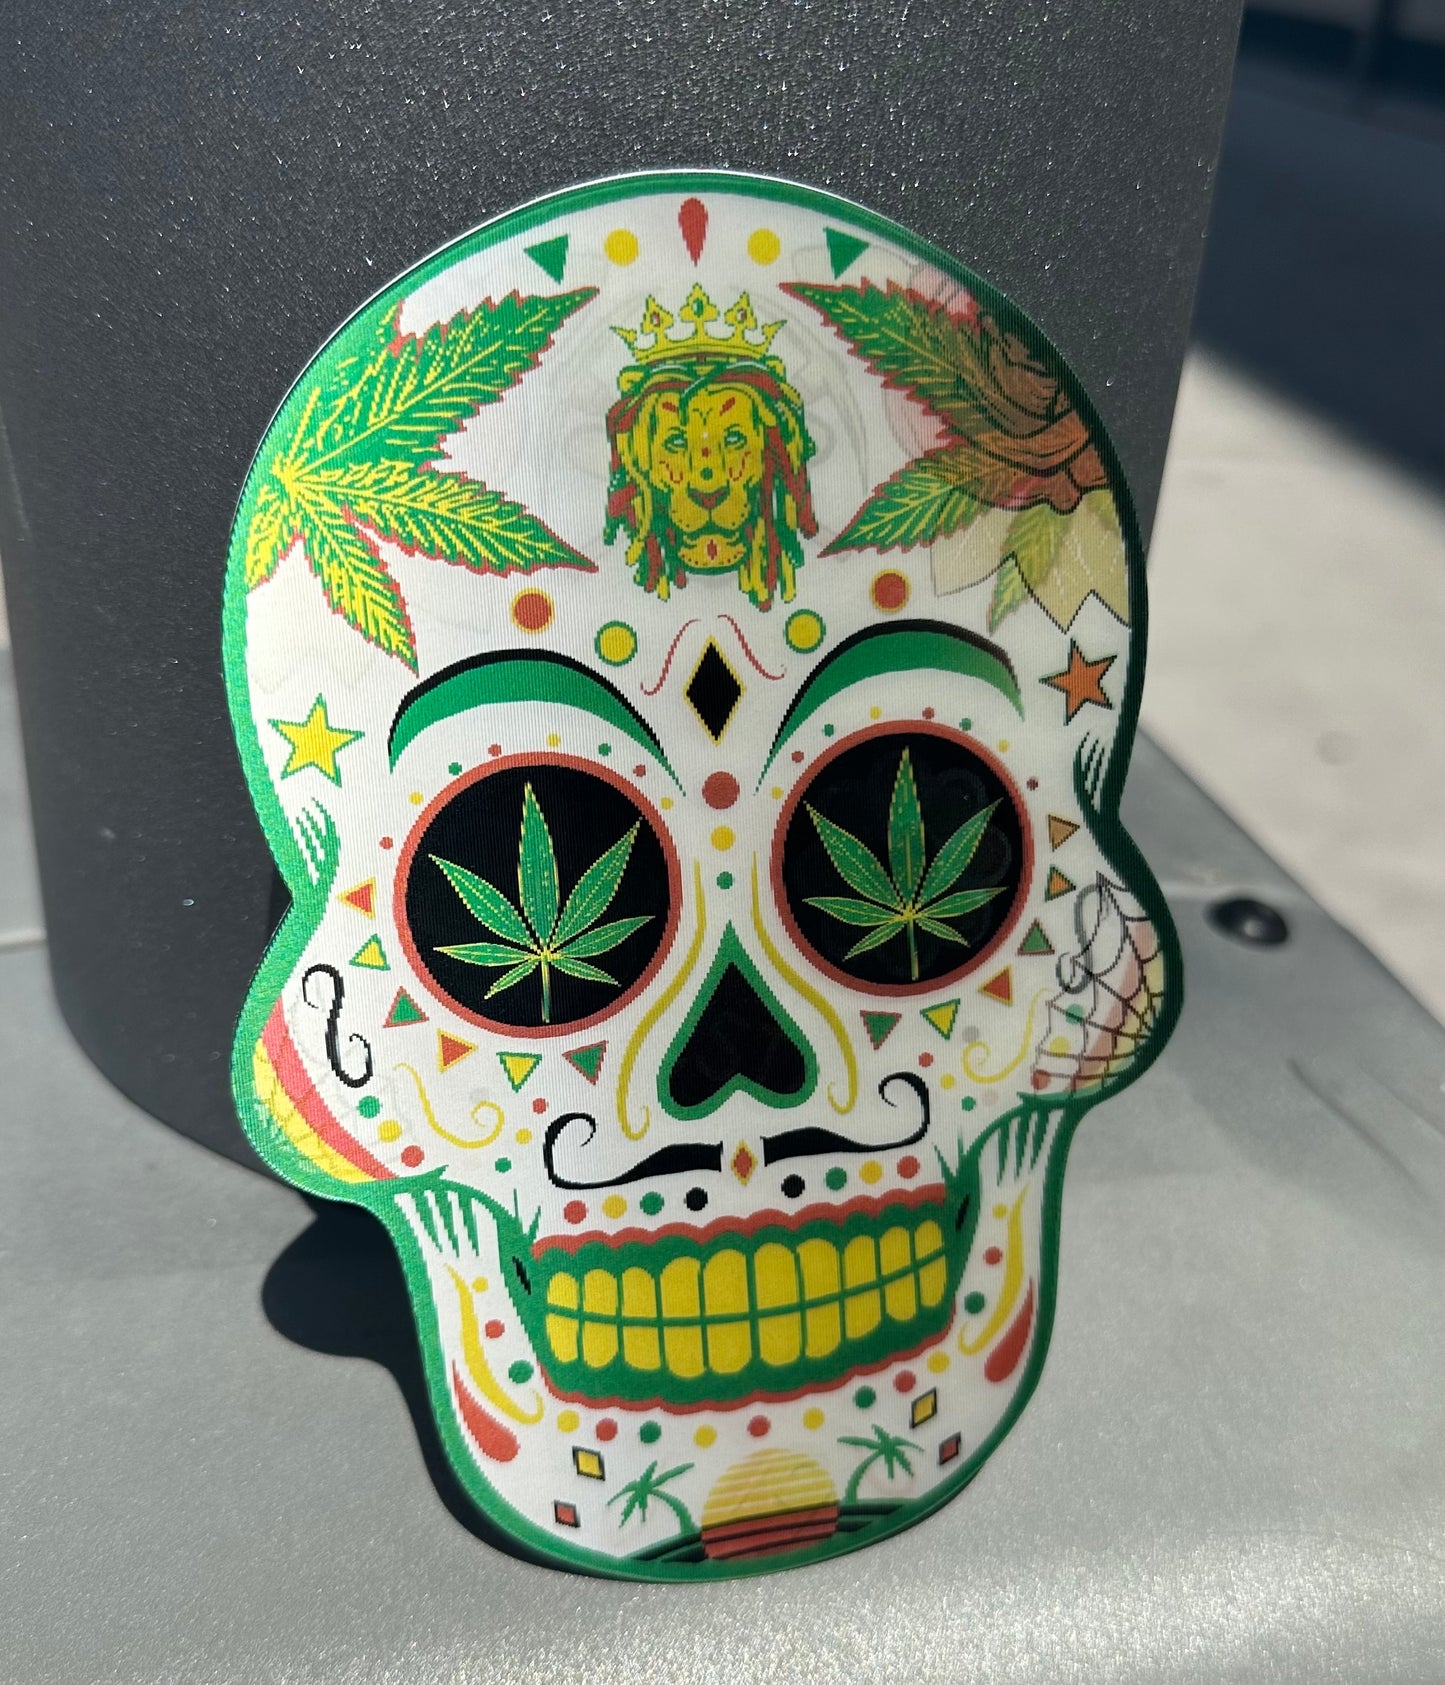 Weed Skull Candy Sticker Decal